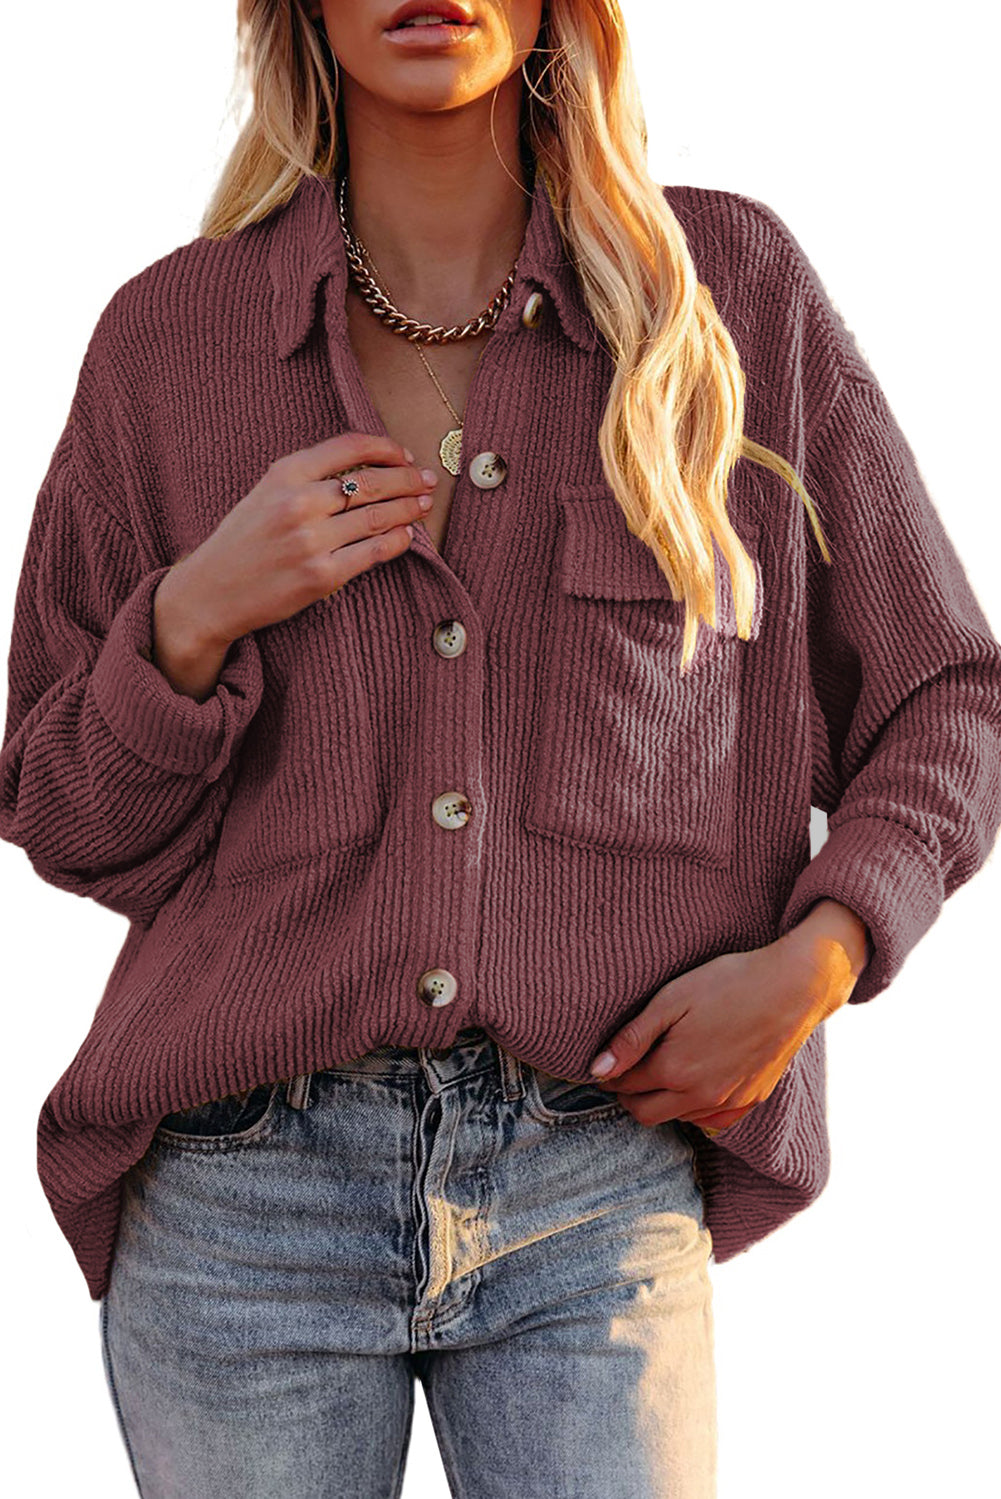 LC8511383-17-S, LC8511383-17-M, LC8511383-17-L, LC8511383-17-XL, LC8511383-17-2XL, Brown Womens Boyfriend Shirt Ribbed Shacket Loose Fit Long Sleeve Tops